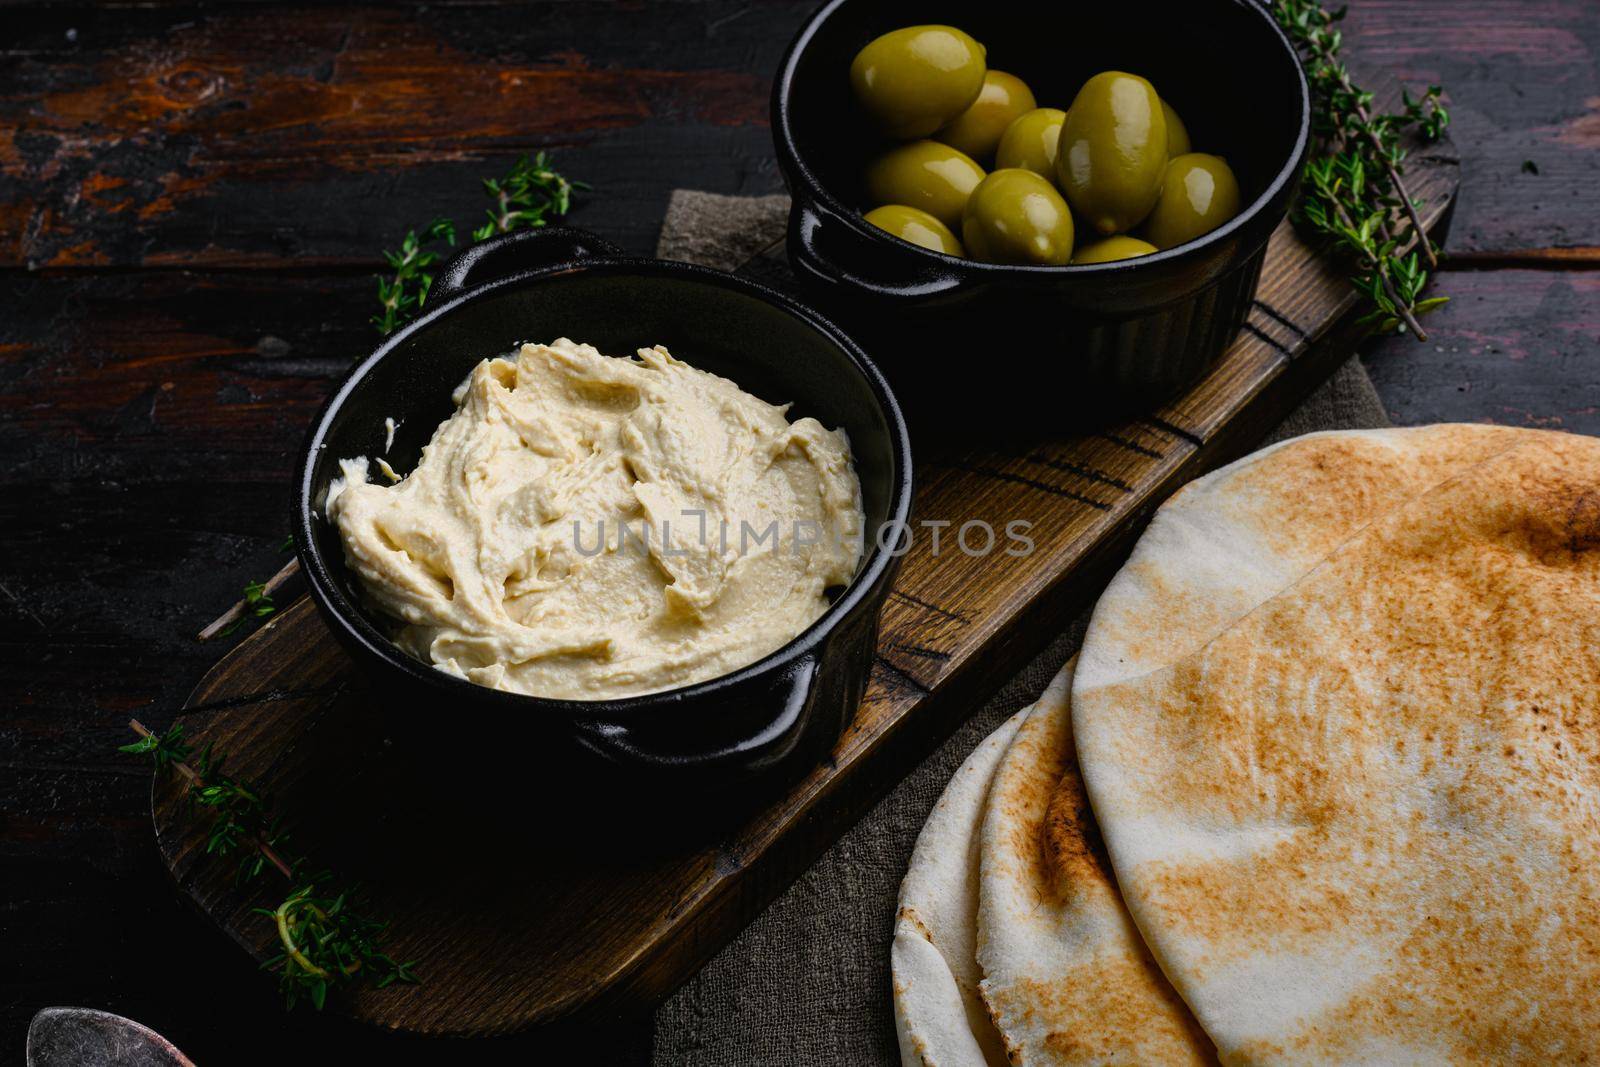 Healthy Homemade Creamy Hummus set, on old dark wooden table background by Ilianesolenyi